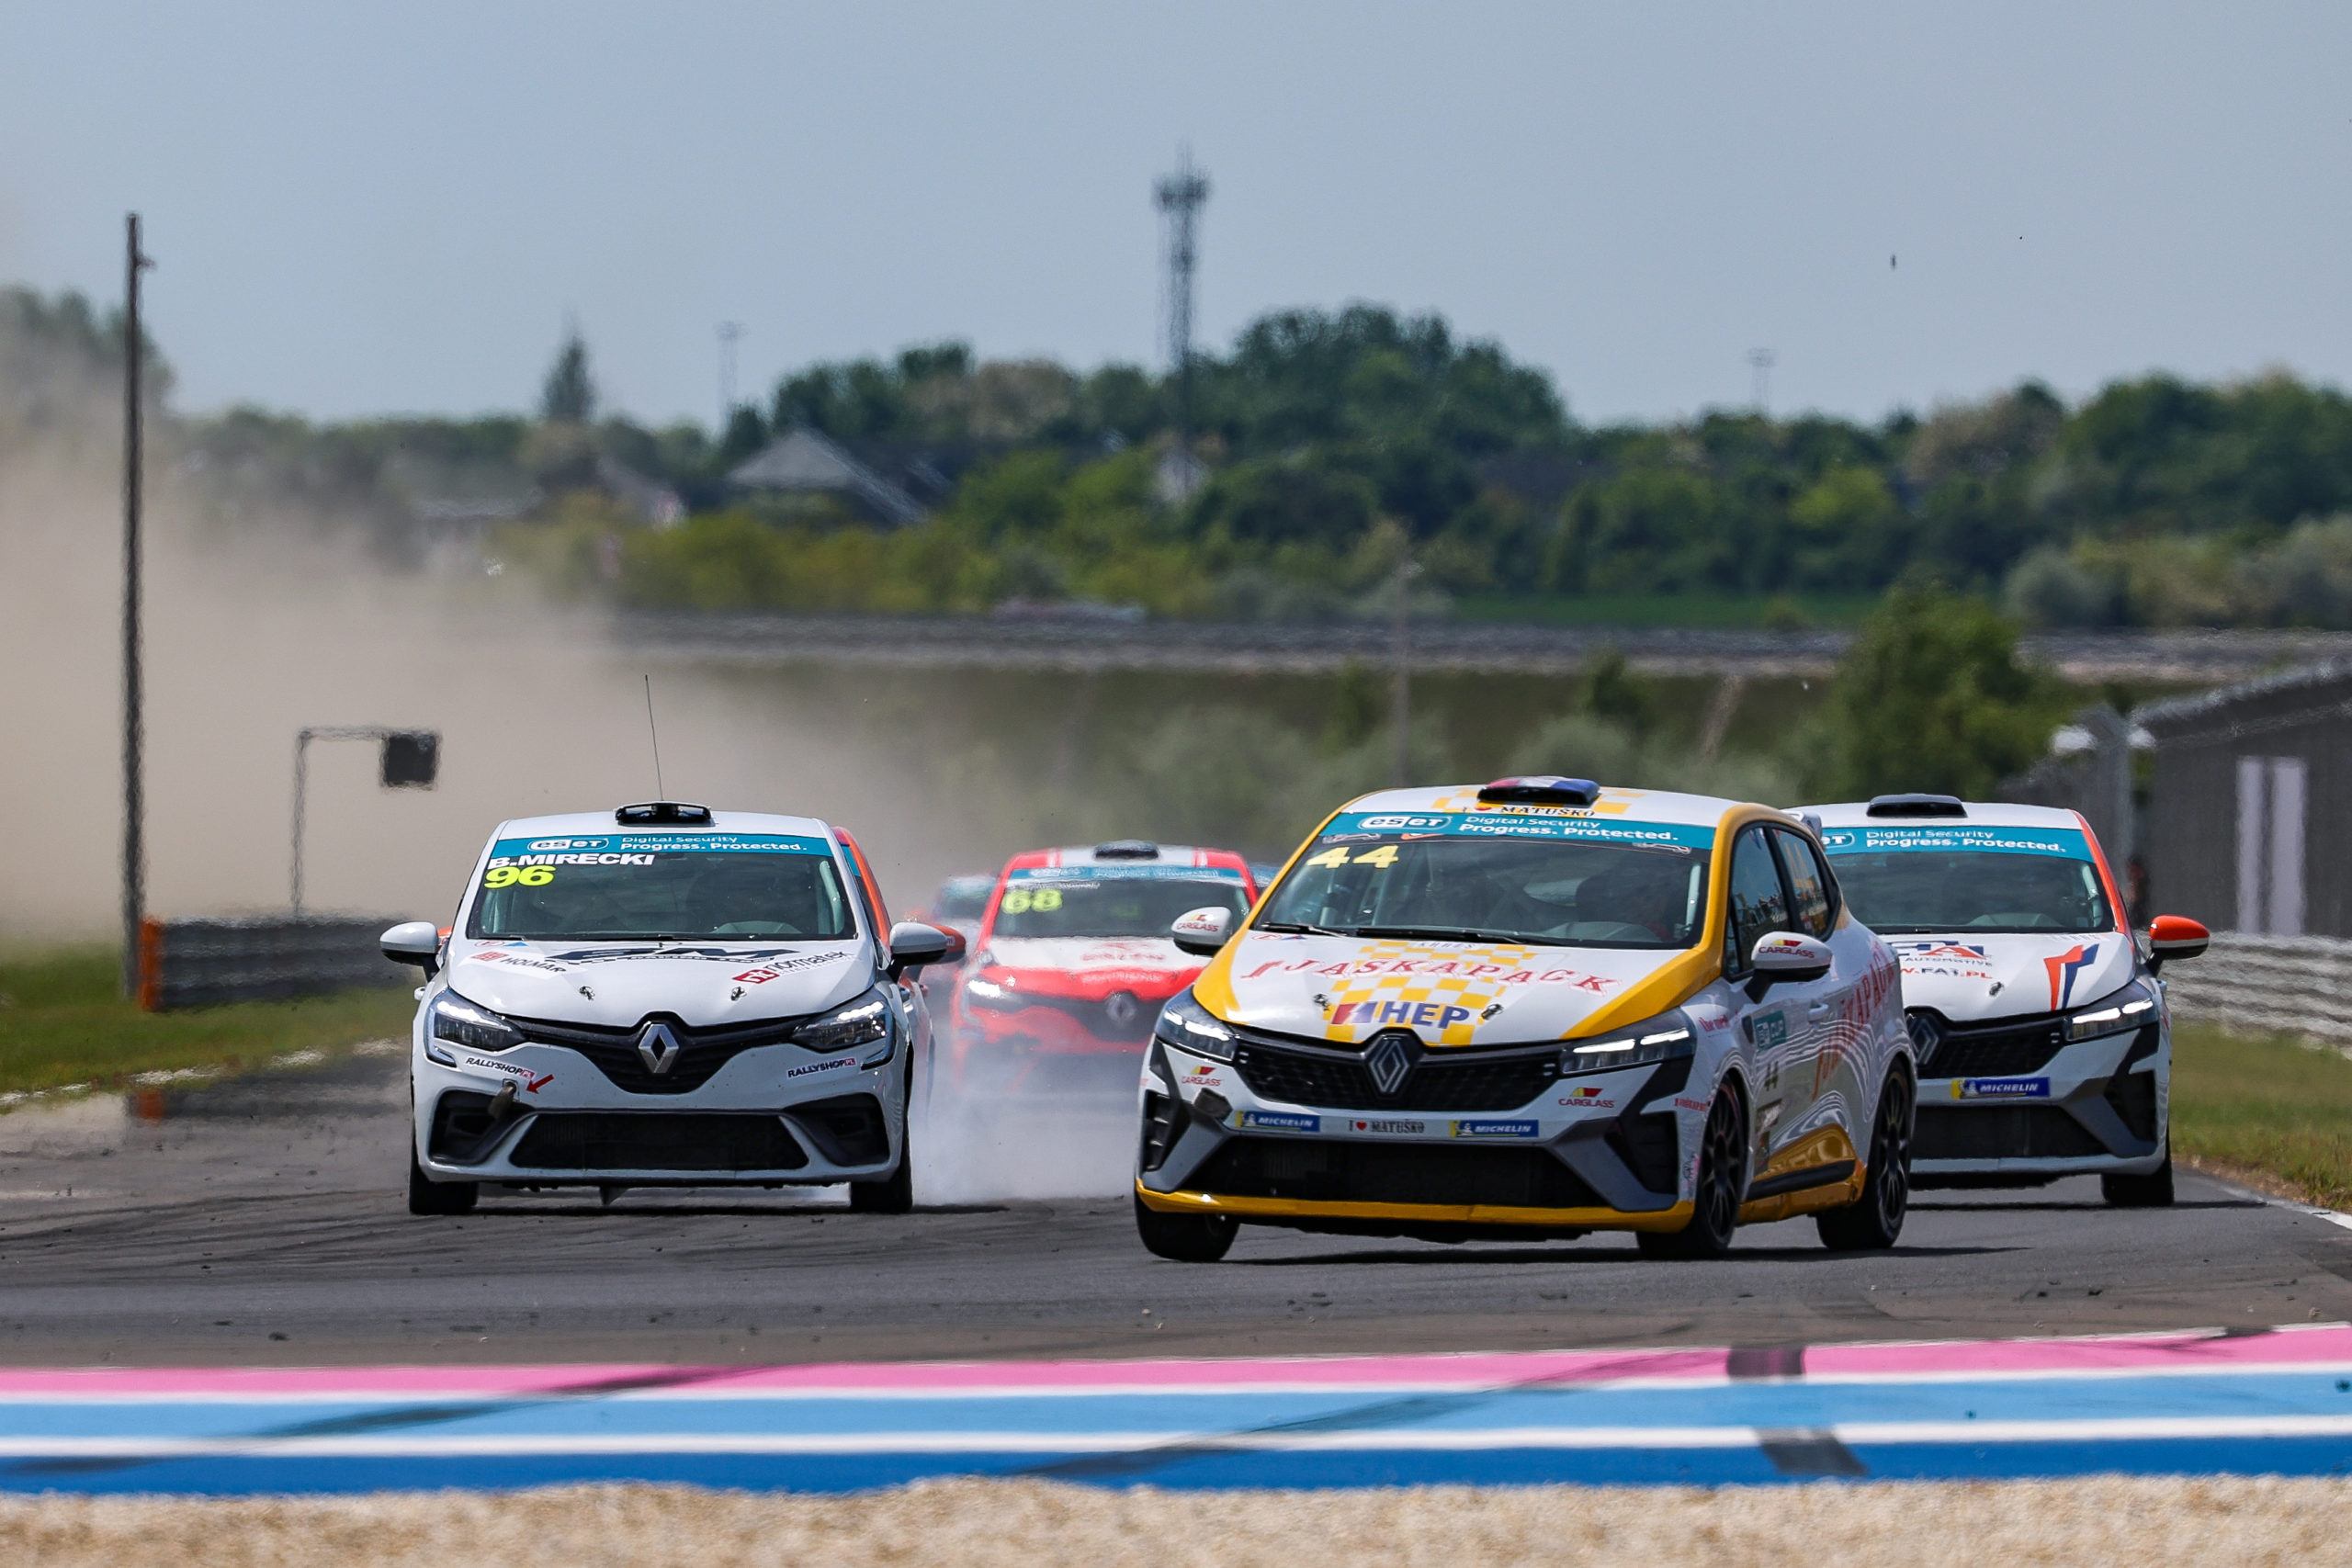 Clio Cup to feature almost 30 cars at Red Bull Ring